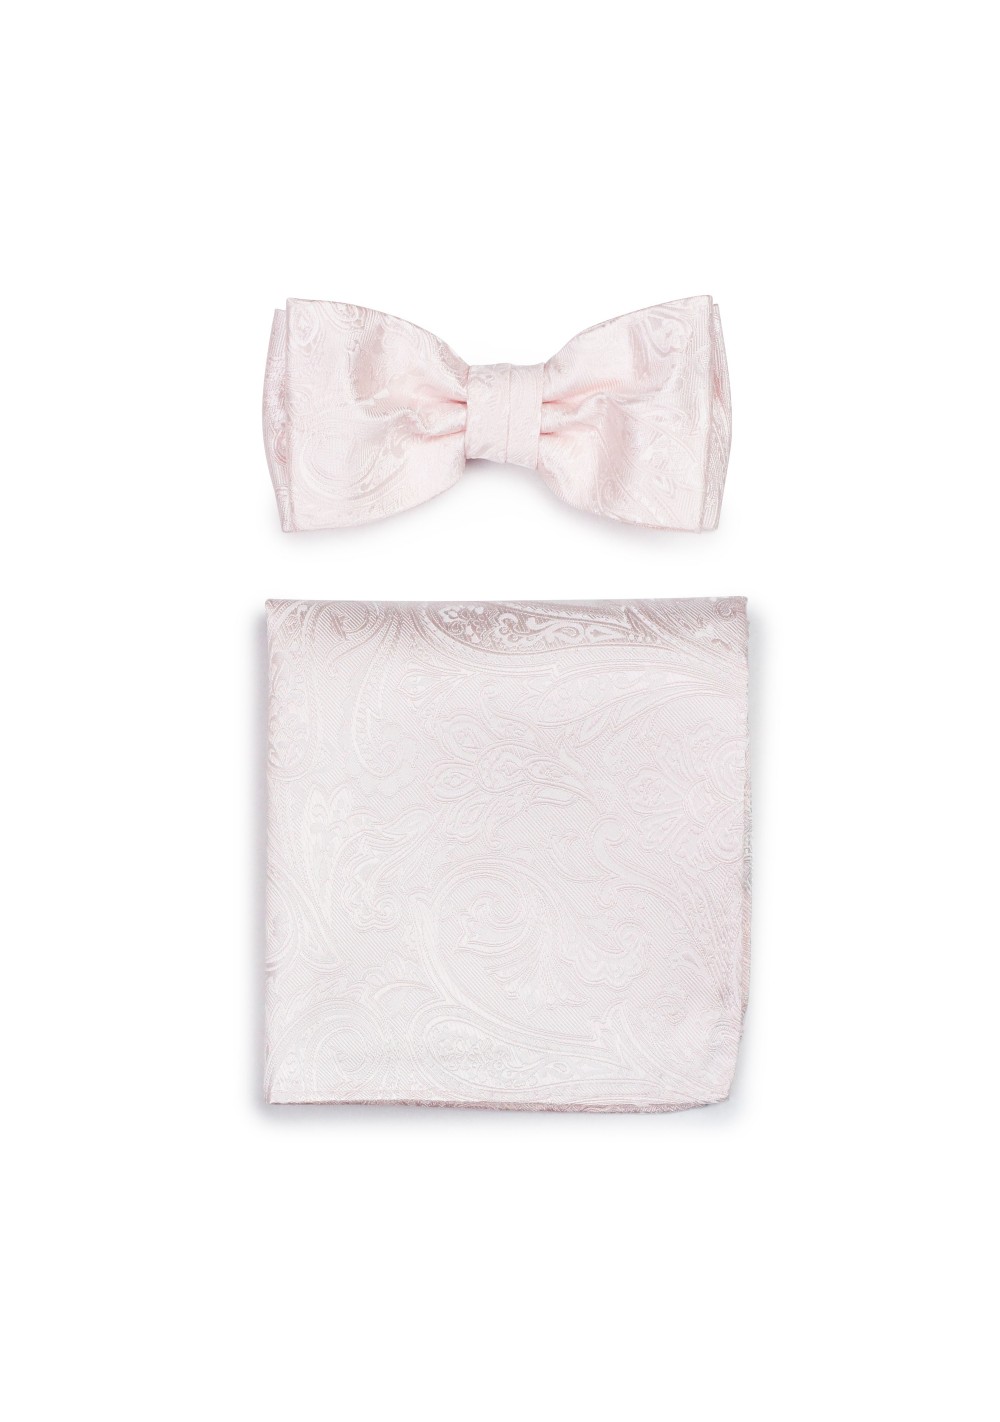 Wedding Bow Tie in Bridal Pink with Matching Pocket Square